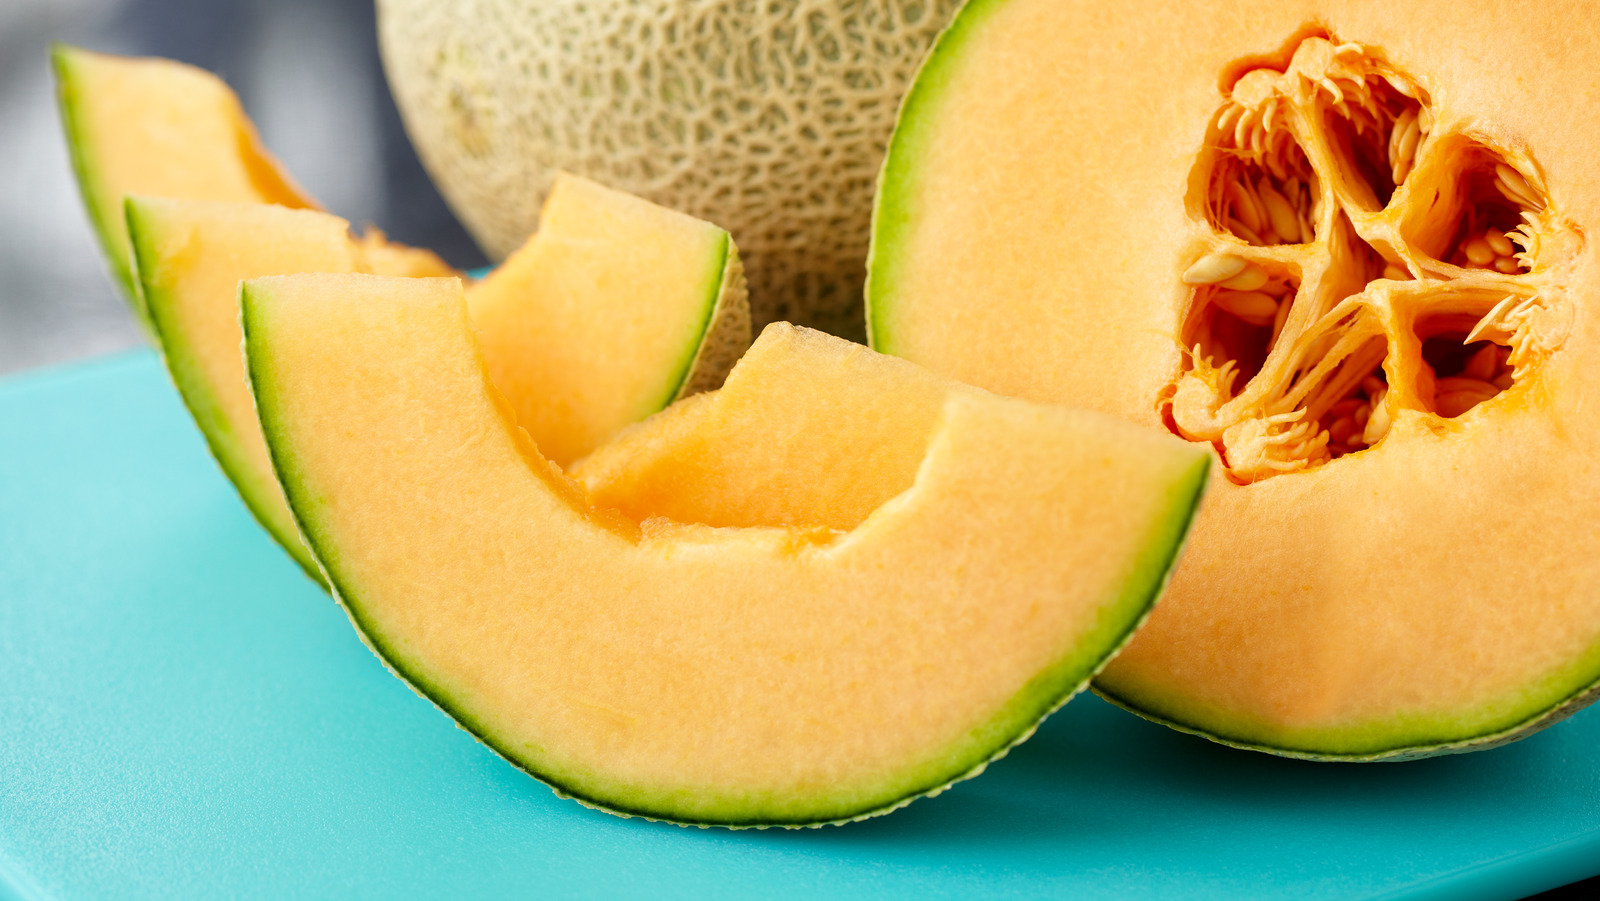 What You Need To Know About The Current Cantaloupe Recall